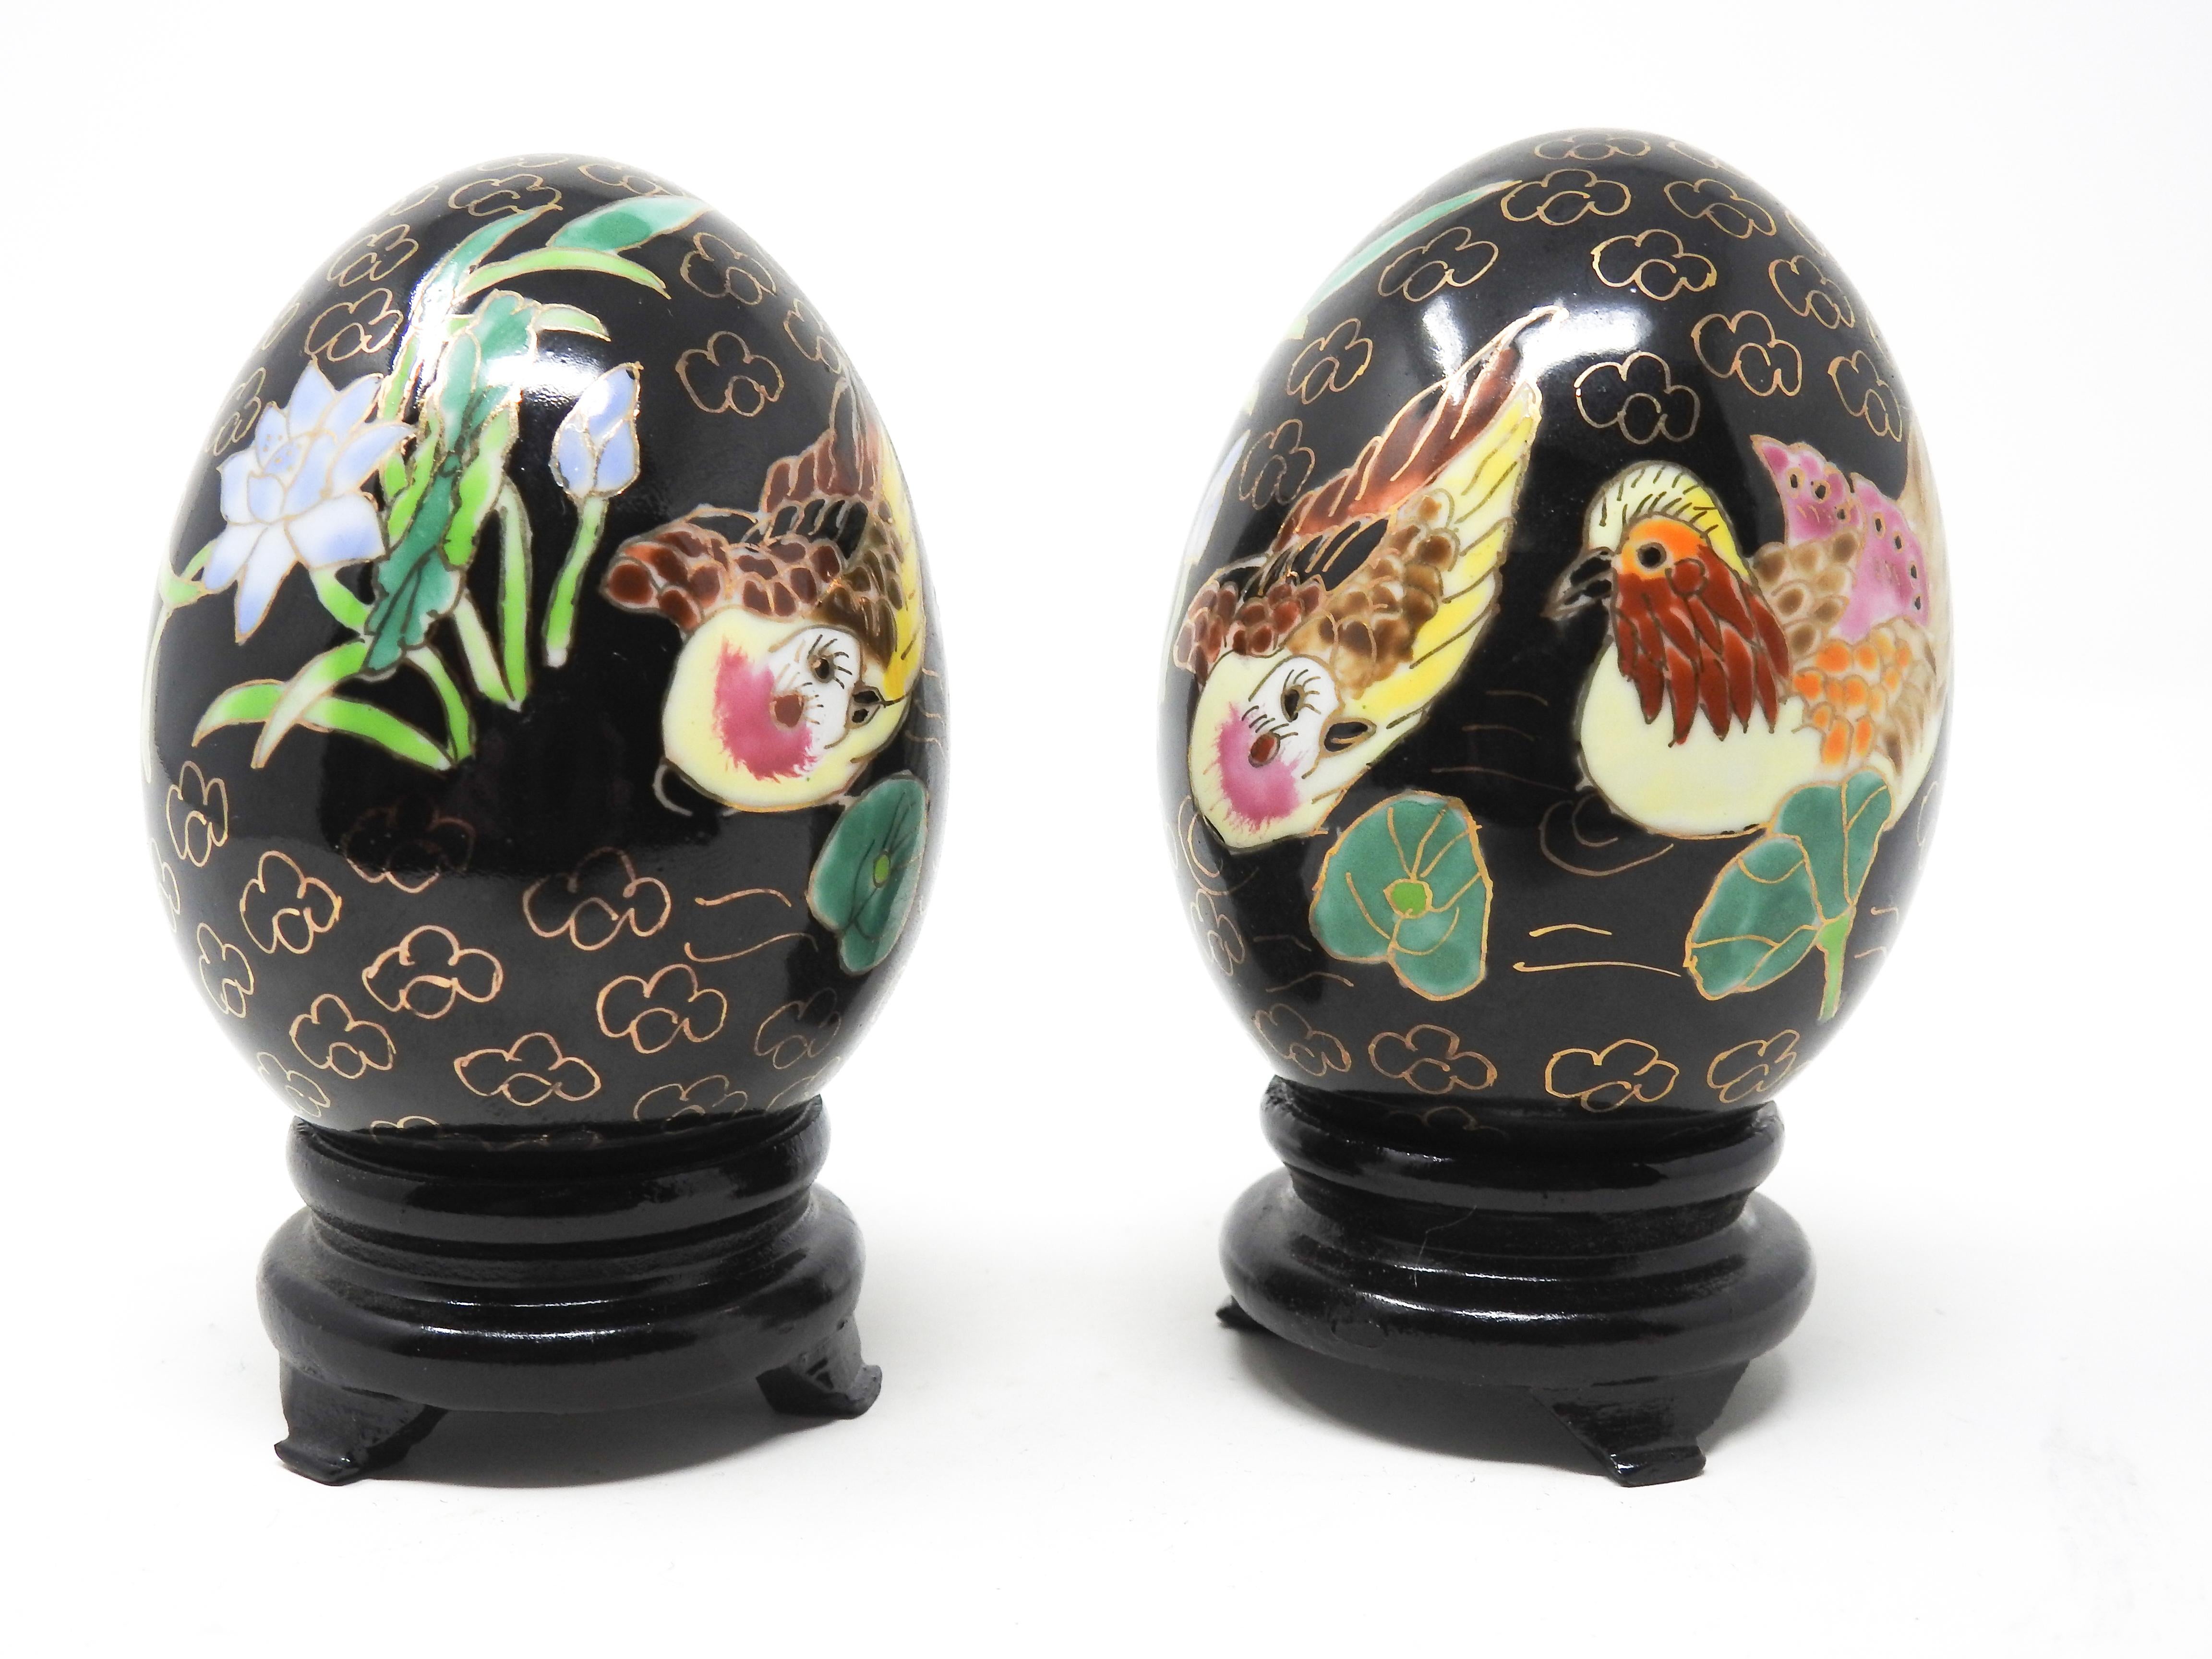 Offering this pair of Chinese chinoiserie enamelware eggs. The background is in a dark black, and has gold puffs on most of the surface. There are two hens depicted in vibrant colors, and to either side of them foliate and floral designs. The eggs